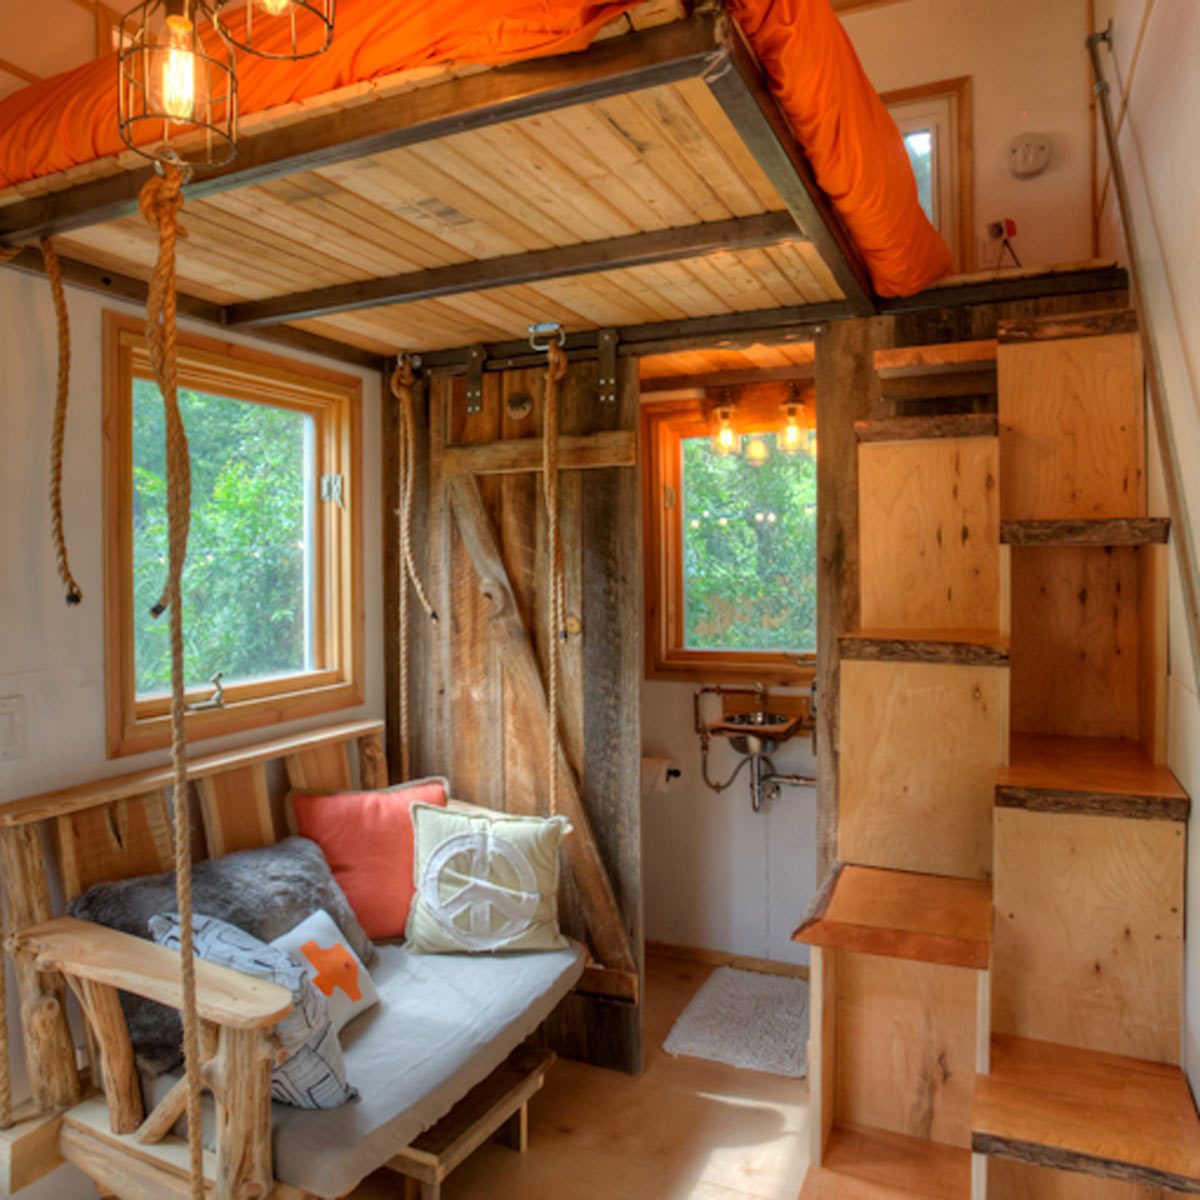 5 Tips to Consider When Designing a Tiny House